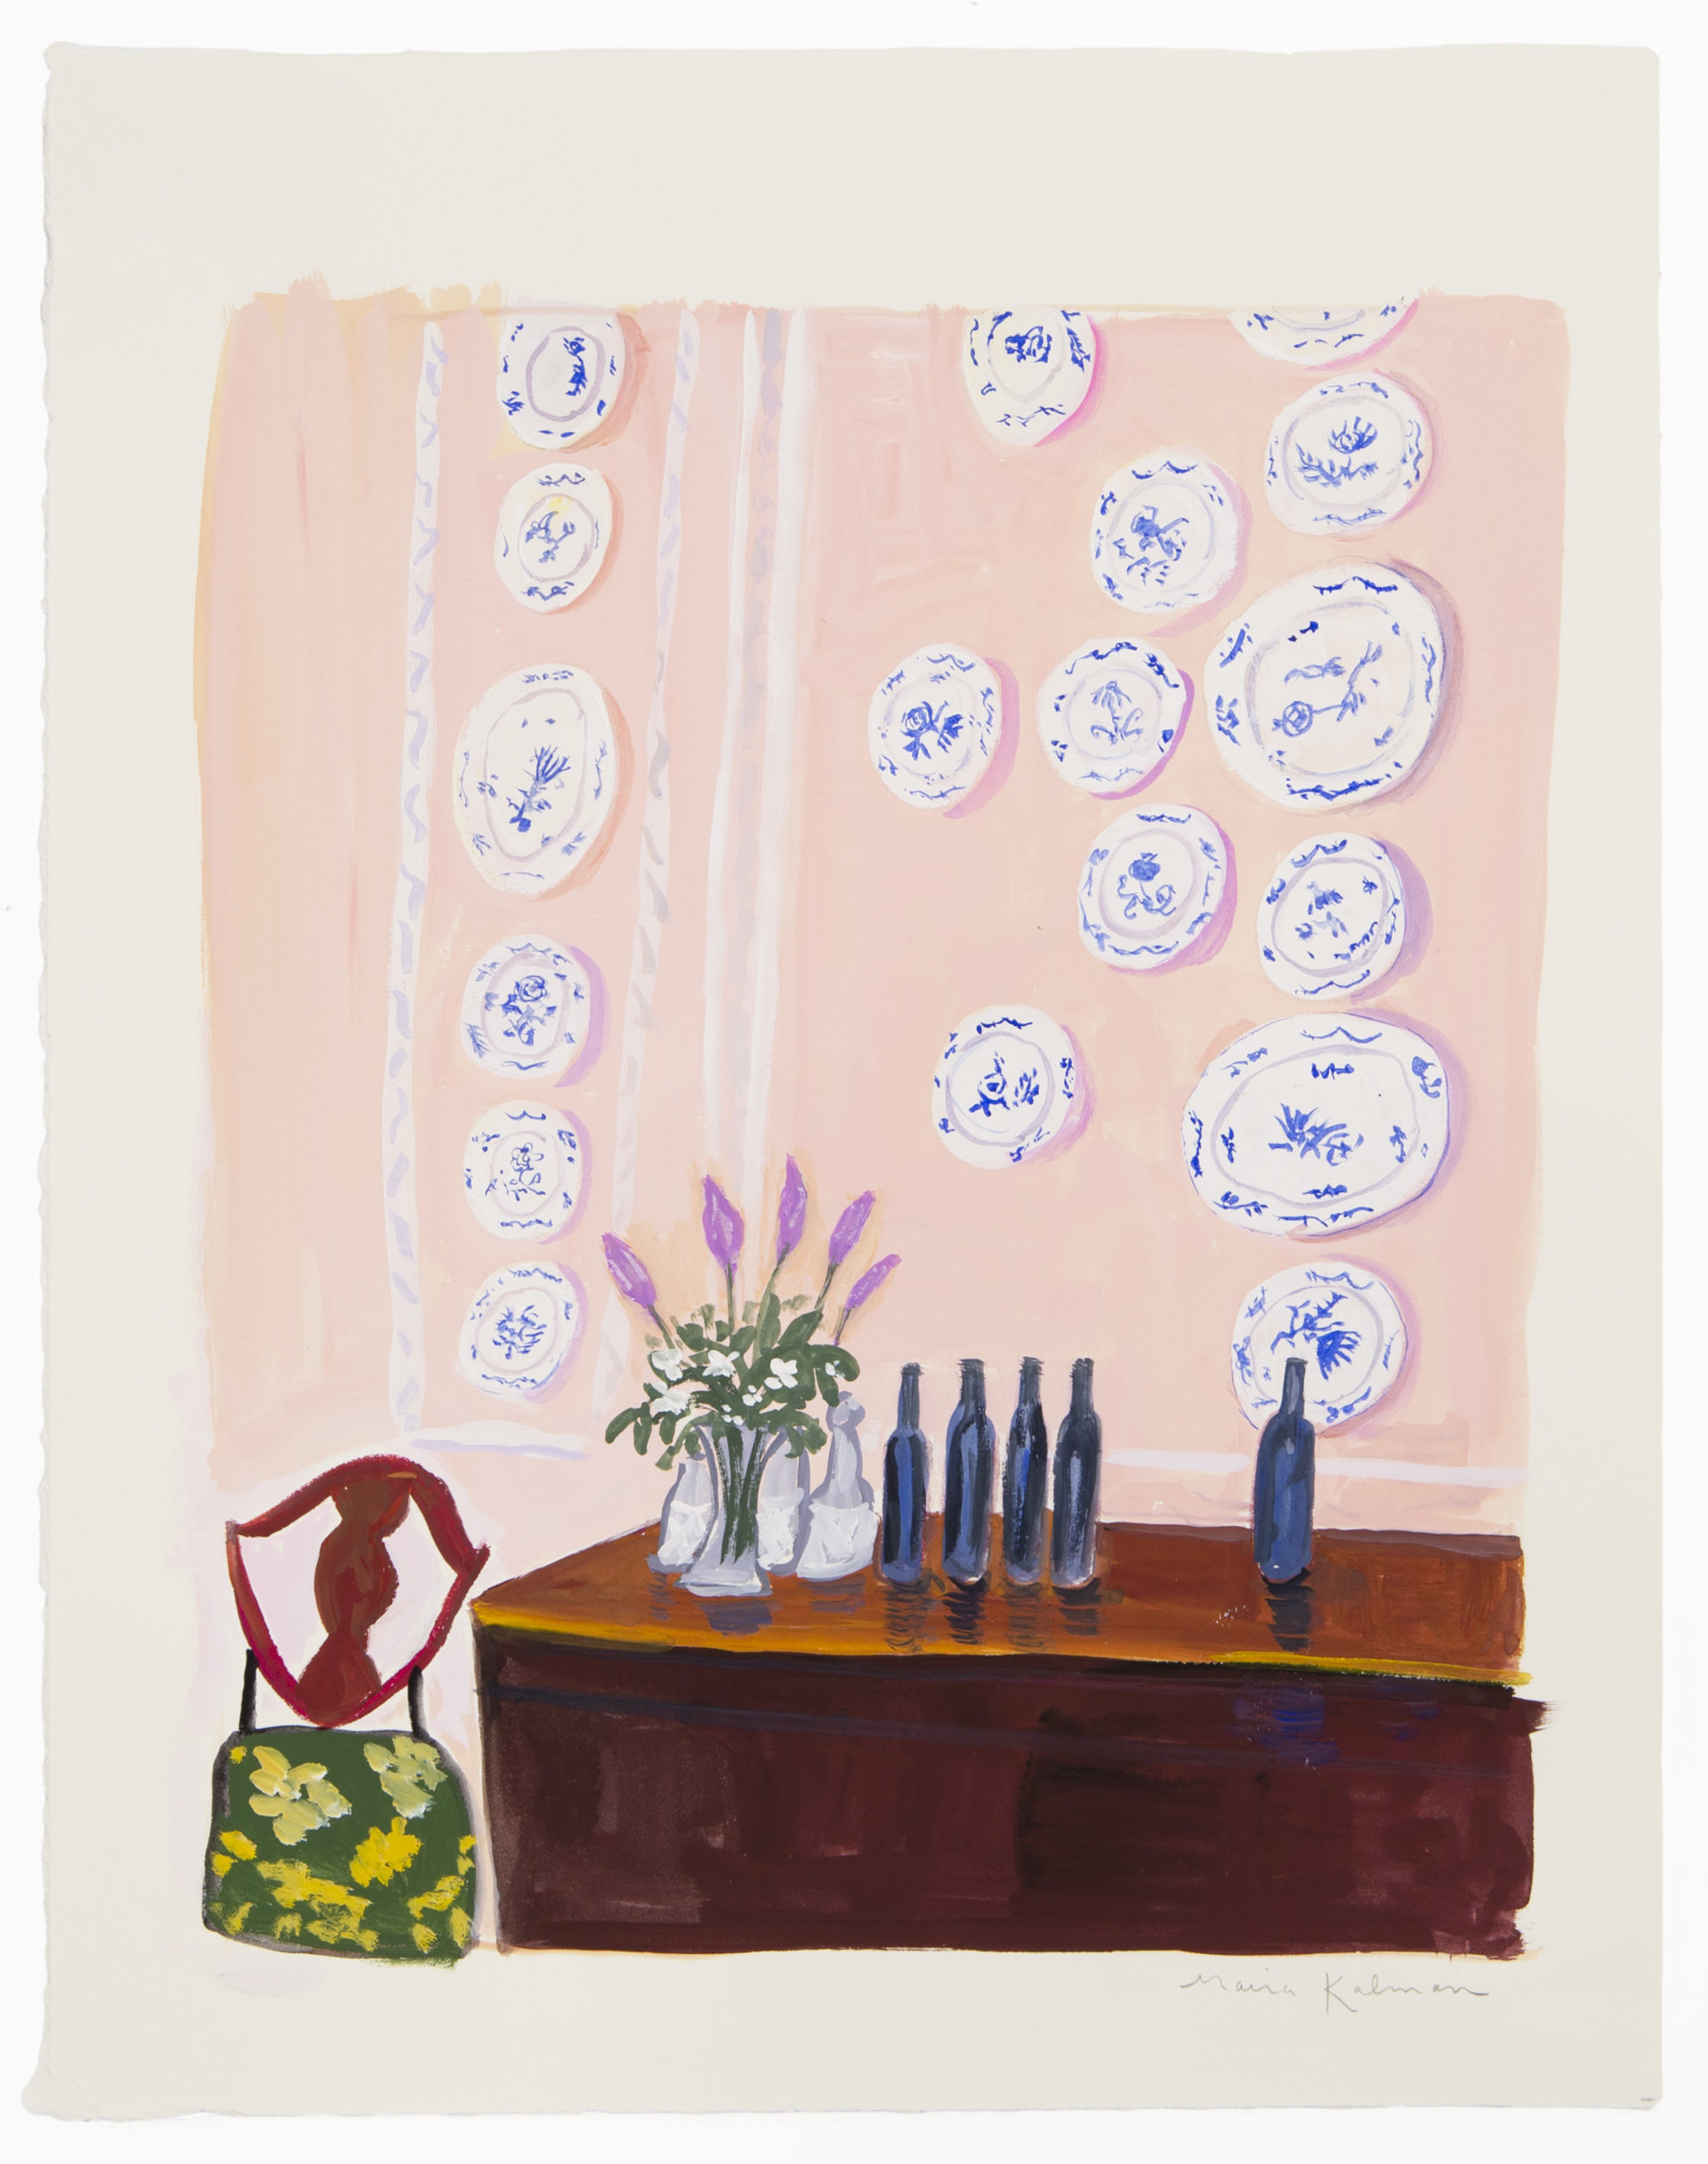 Maira Kalman !e Painted Plates from Departures Magazine; Smedmare House, England, 2016 Gouache Image Dimensions: 11 3/8 x 9 1/4 inches (28.9 x 23.5 cm) Paper Dimensions: 14 x 11 1/4 inches (35.6 x 28.6 cm)